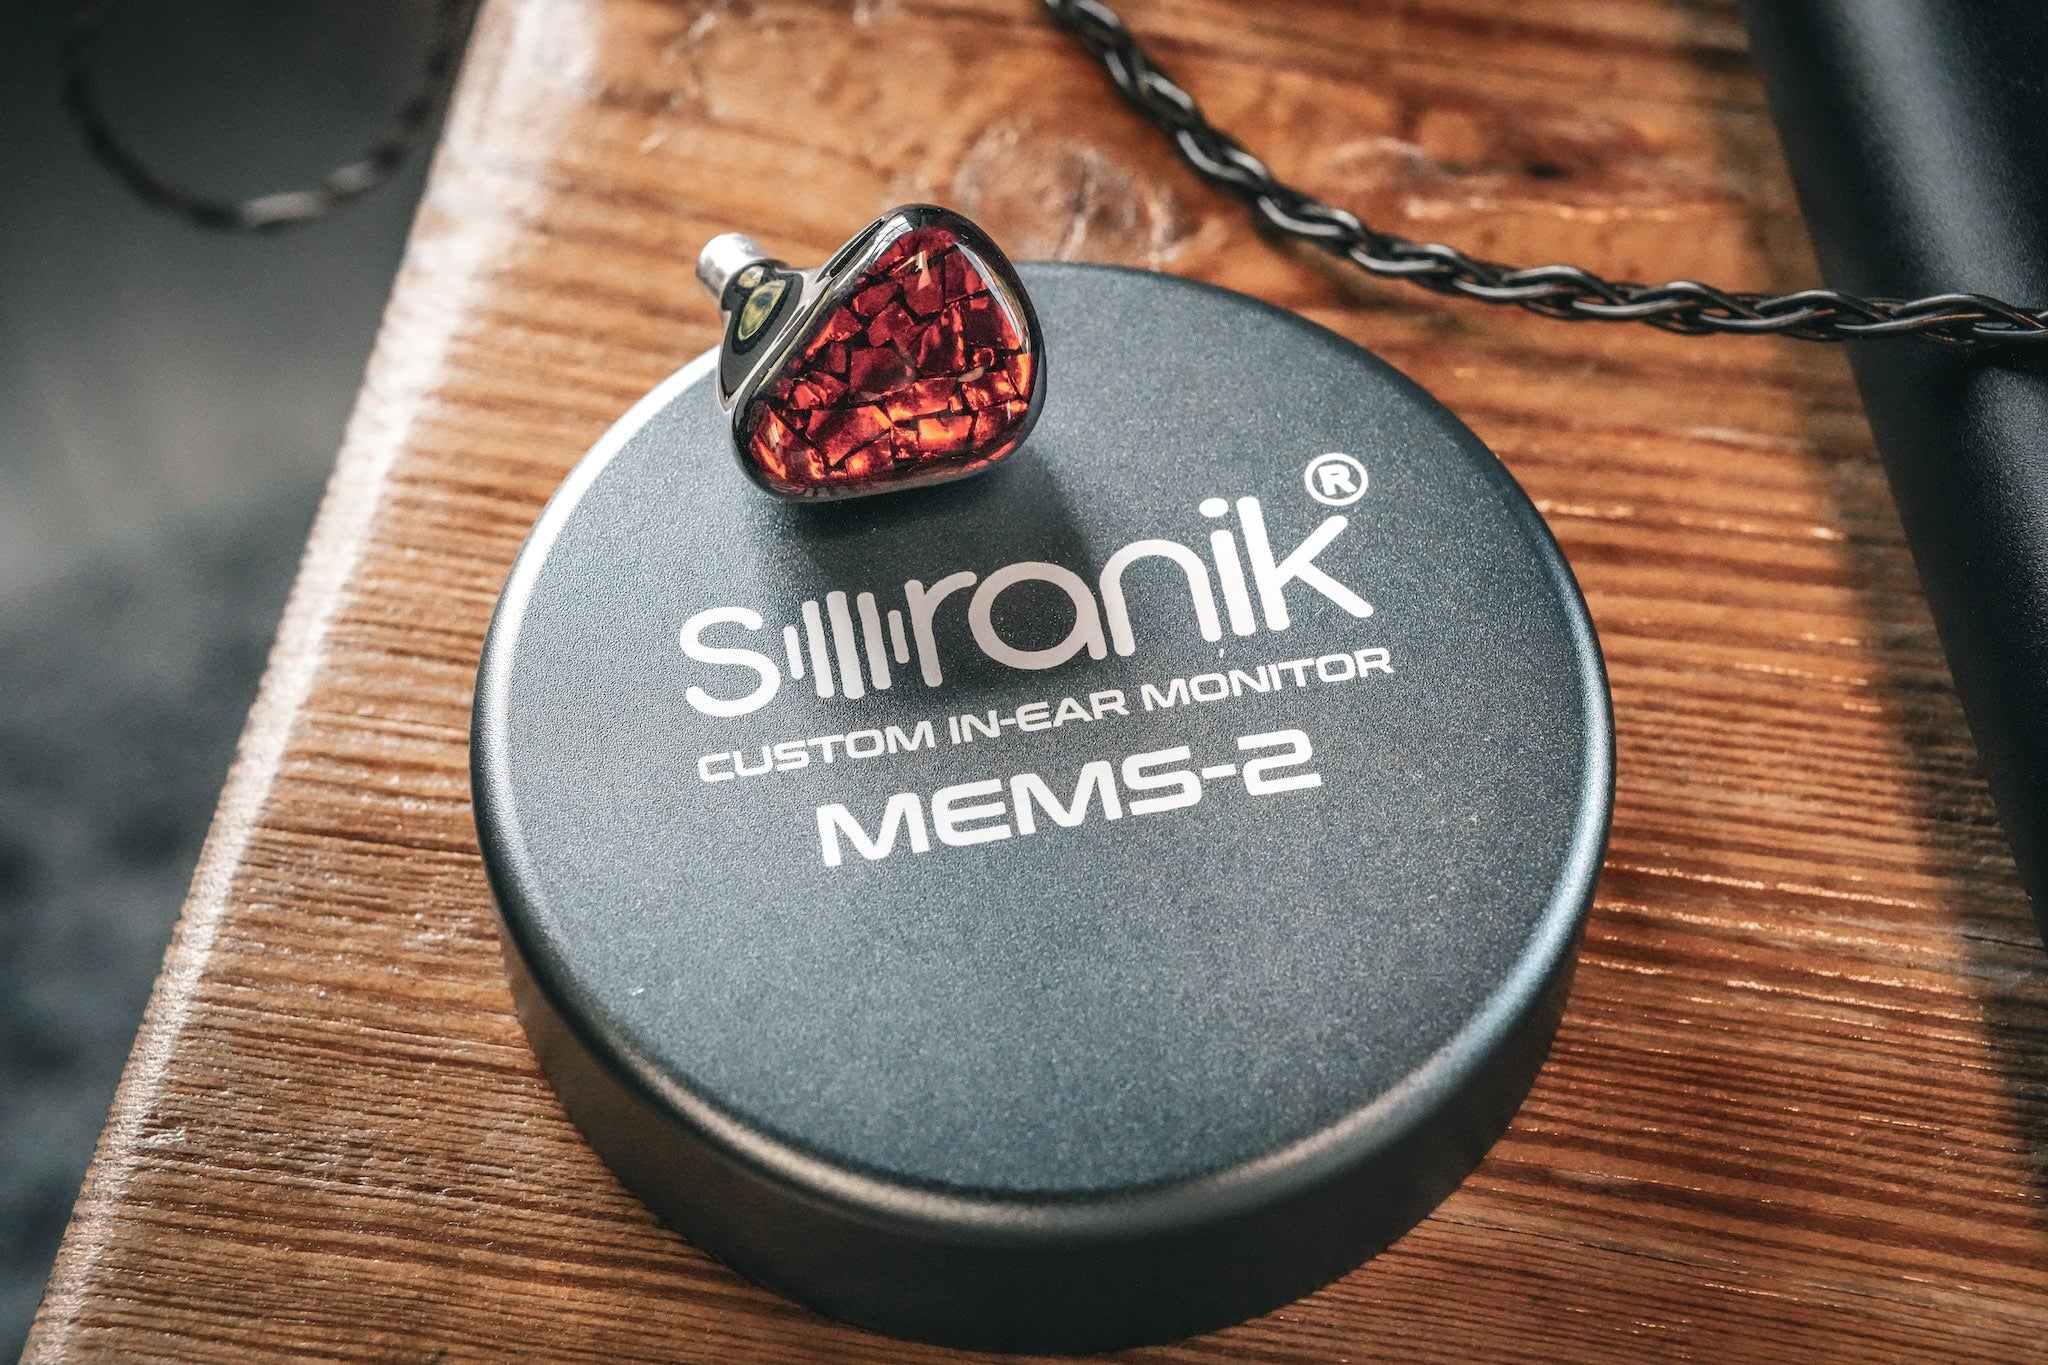 MEMS-2 IEM on top of a Soranik aluminum case resting on top of a wooden stool from the Bloom Audio Gallery